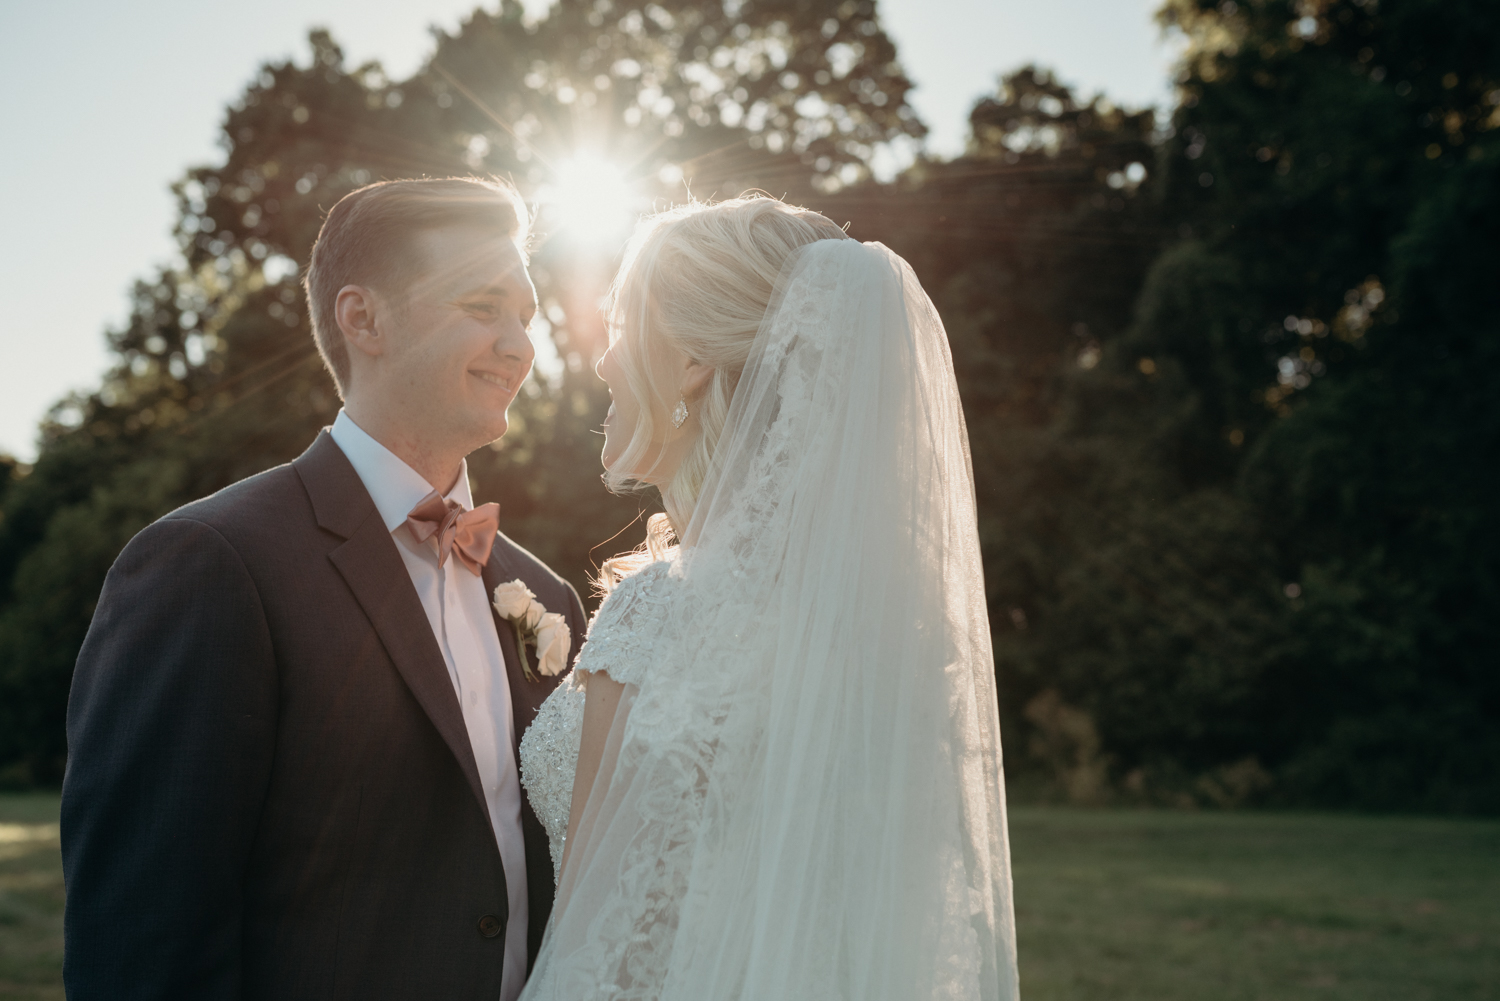 The sun shines through while a husband and wife gaze at each other after their outdoor wedding ceremony at Lansdowne Resort.